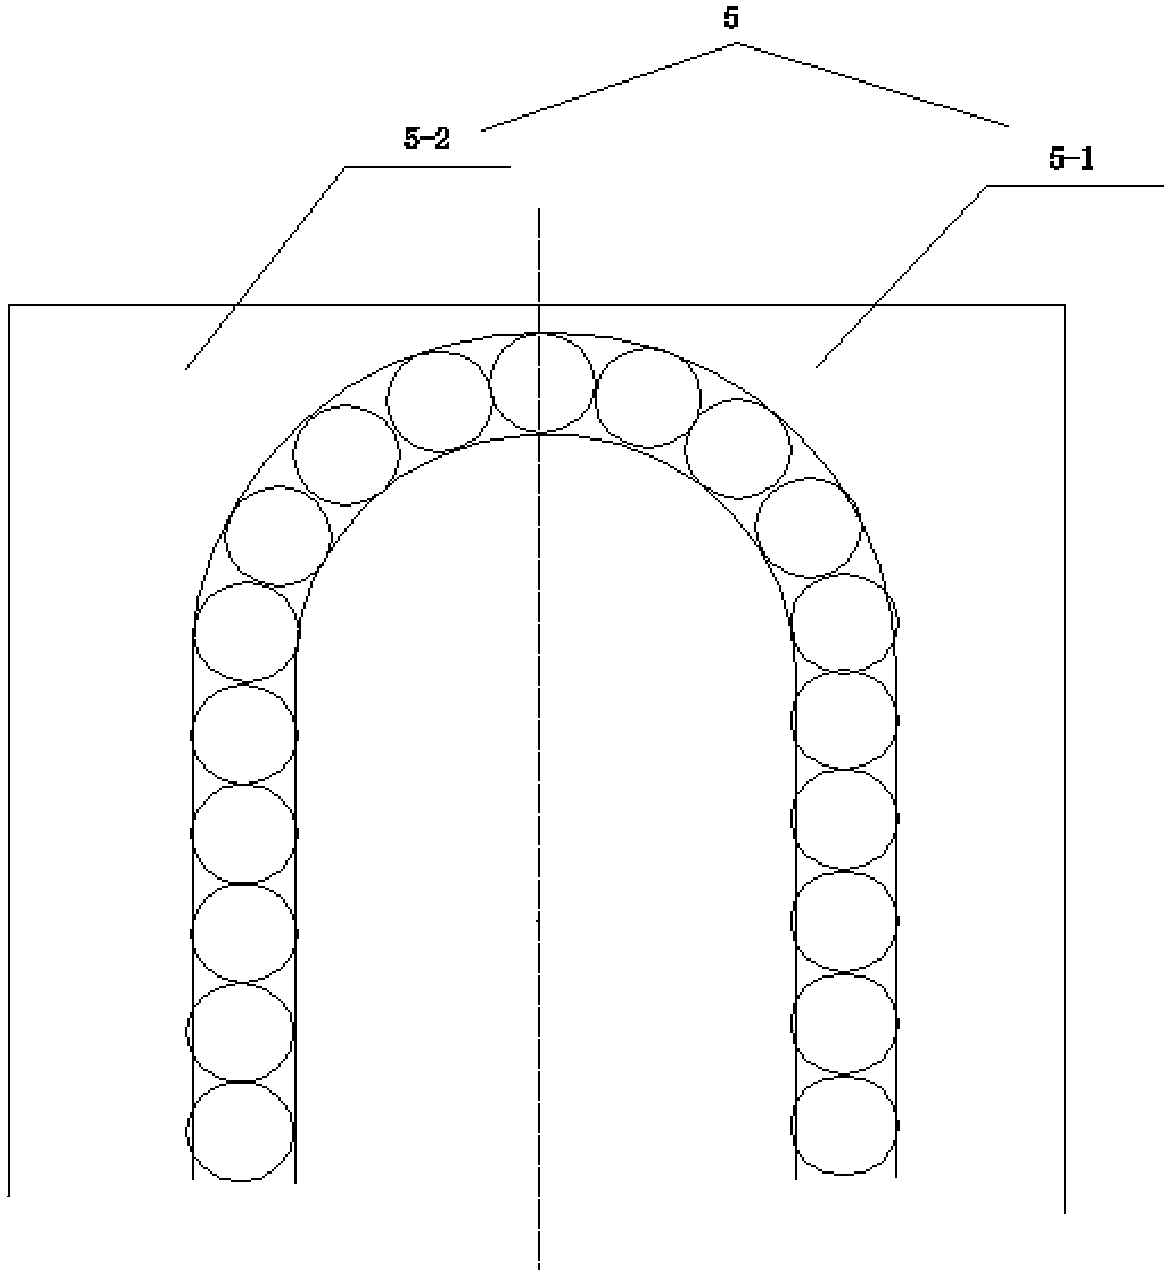 Anti-oxidation U-shaped surface enhancement Raman base coating device and method for monitoring vegetable pesticide residues